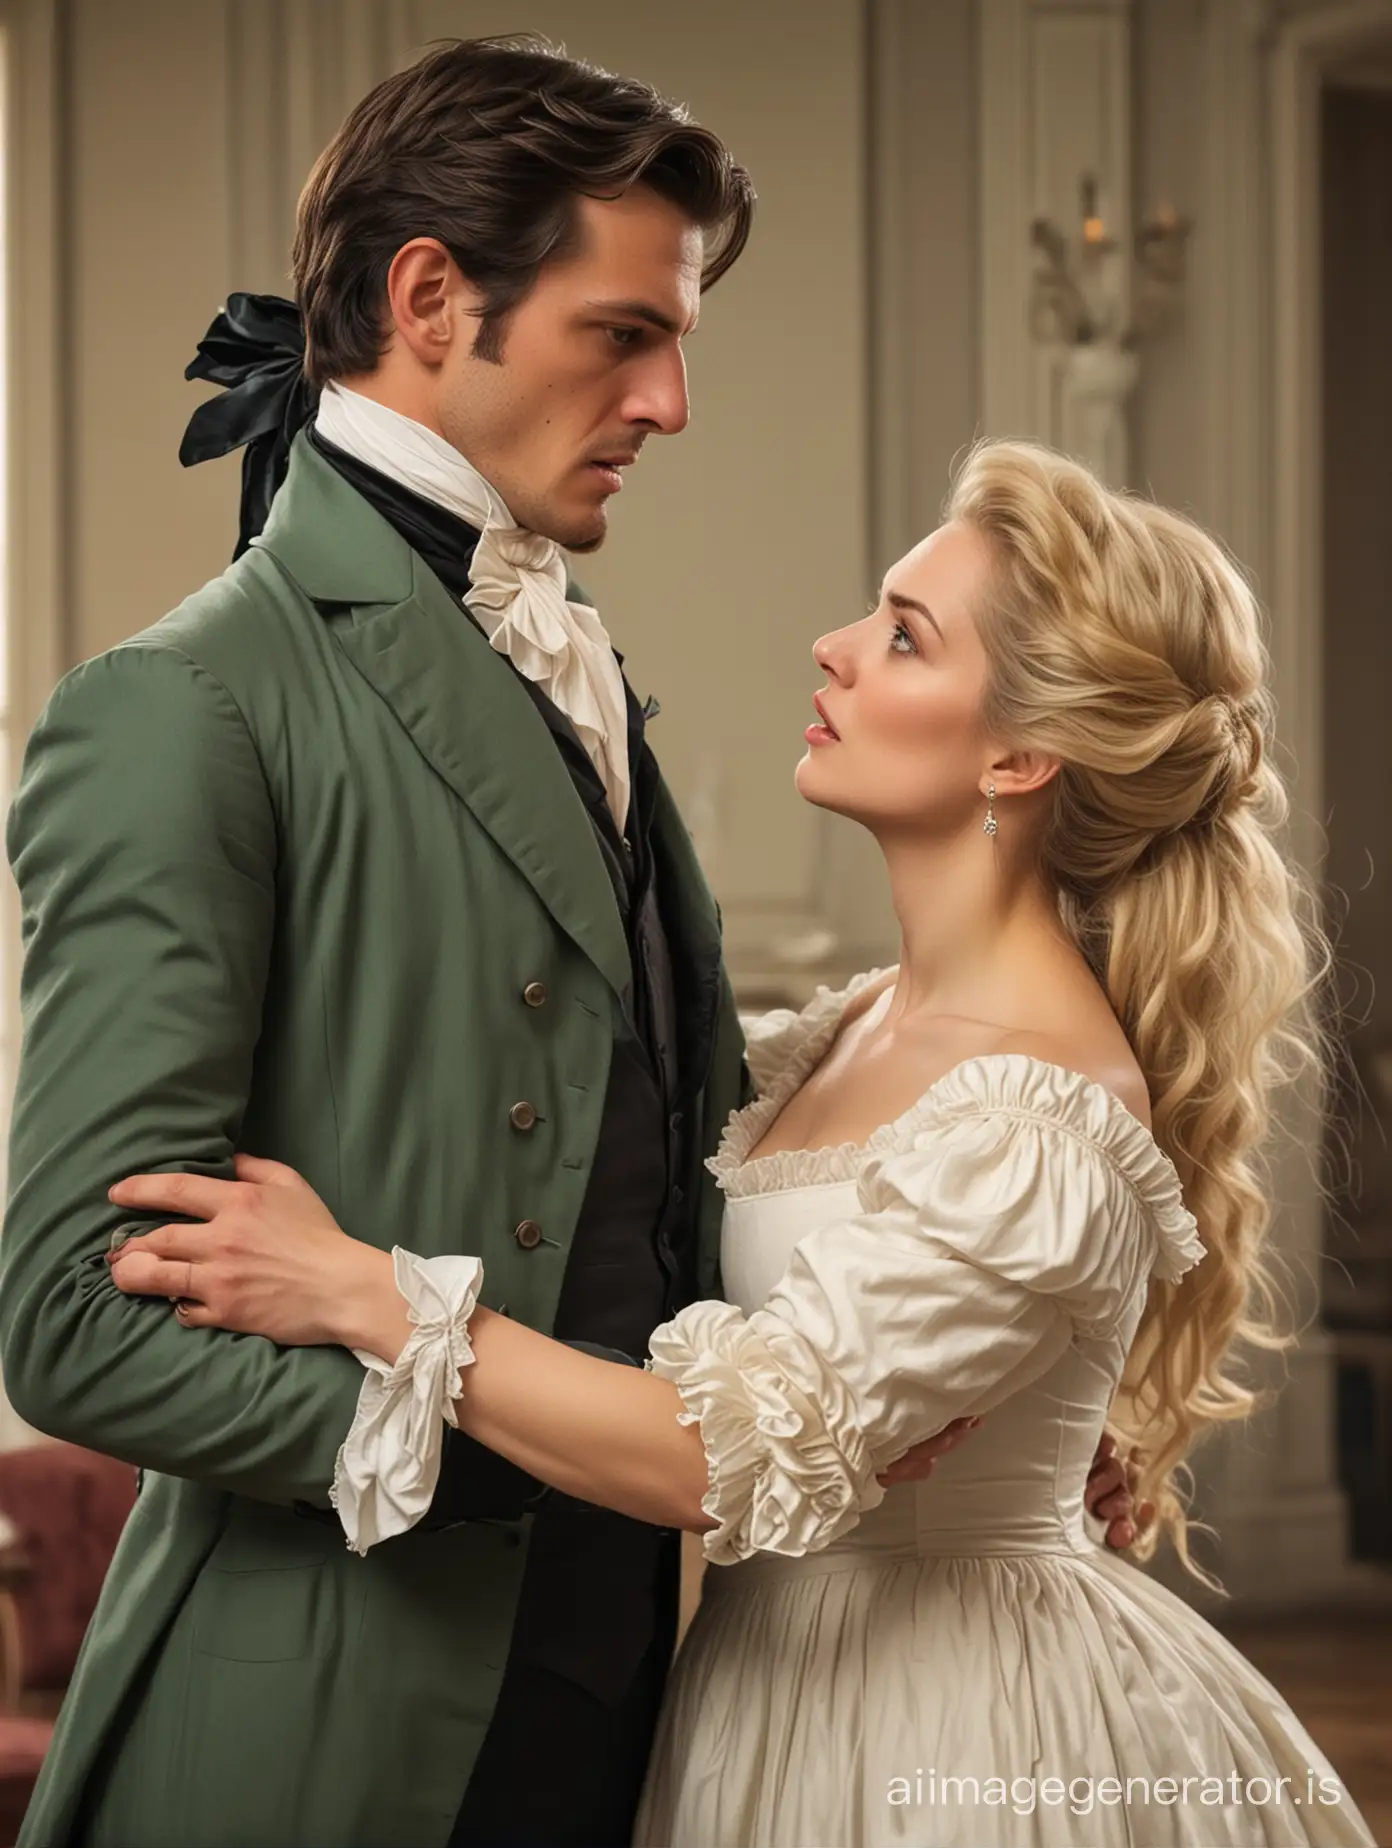 Gentleman ((Regency Era)) holding a blonde lady by the arm in a mansion hall sad angry expression, arguing